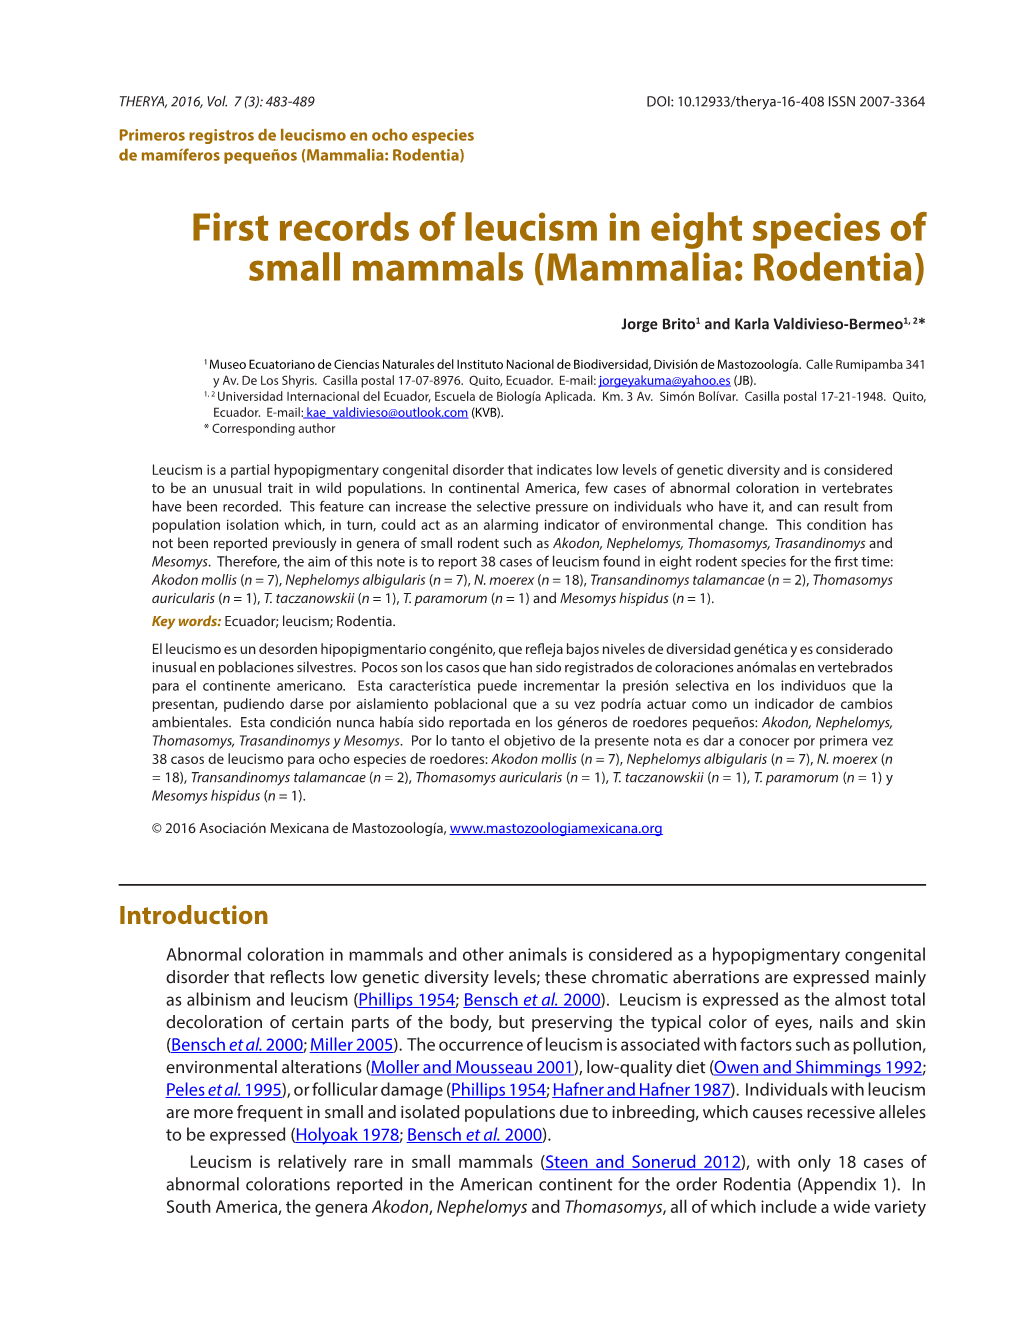 First Records of Leucism in Eight Species of Small Mammals (Mammalia: Rodentia)